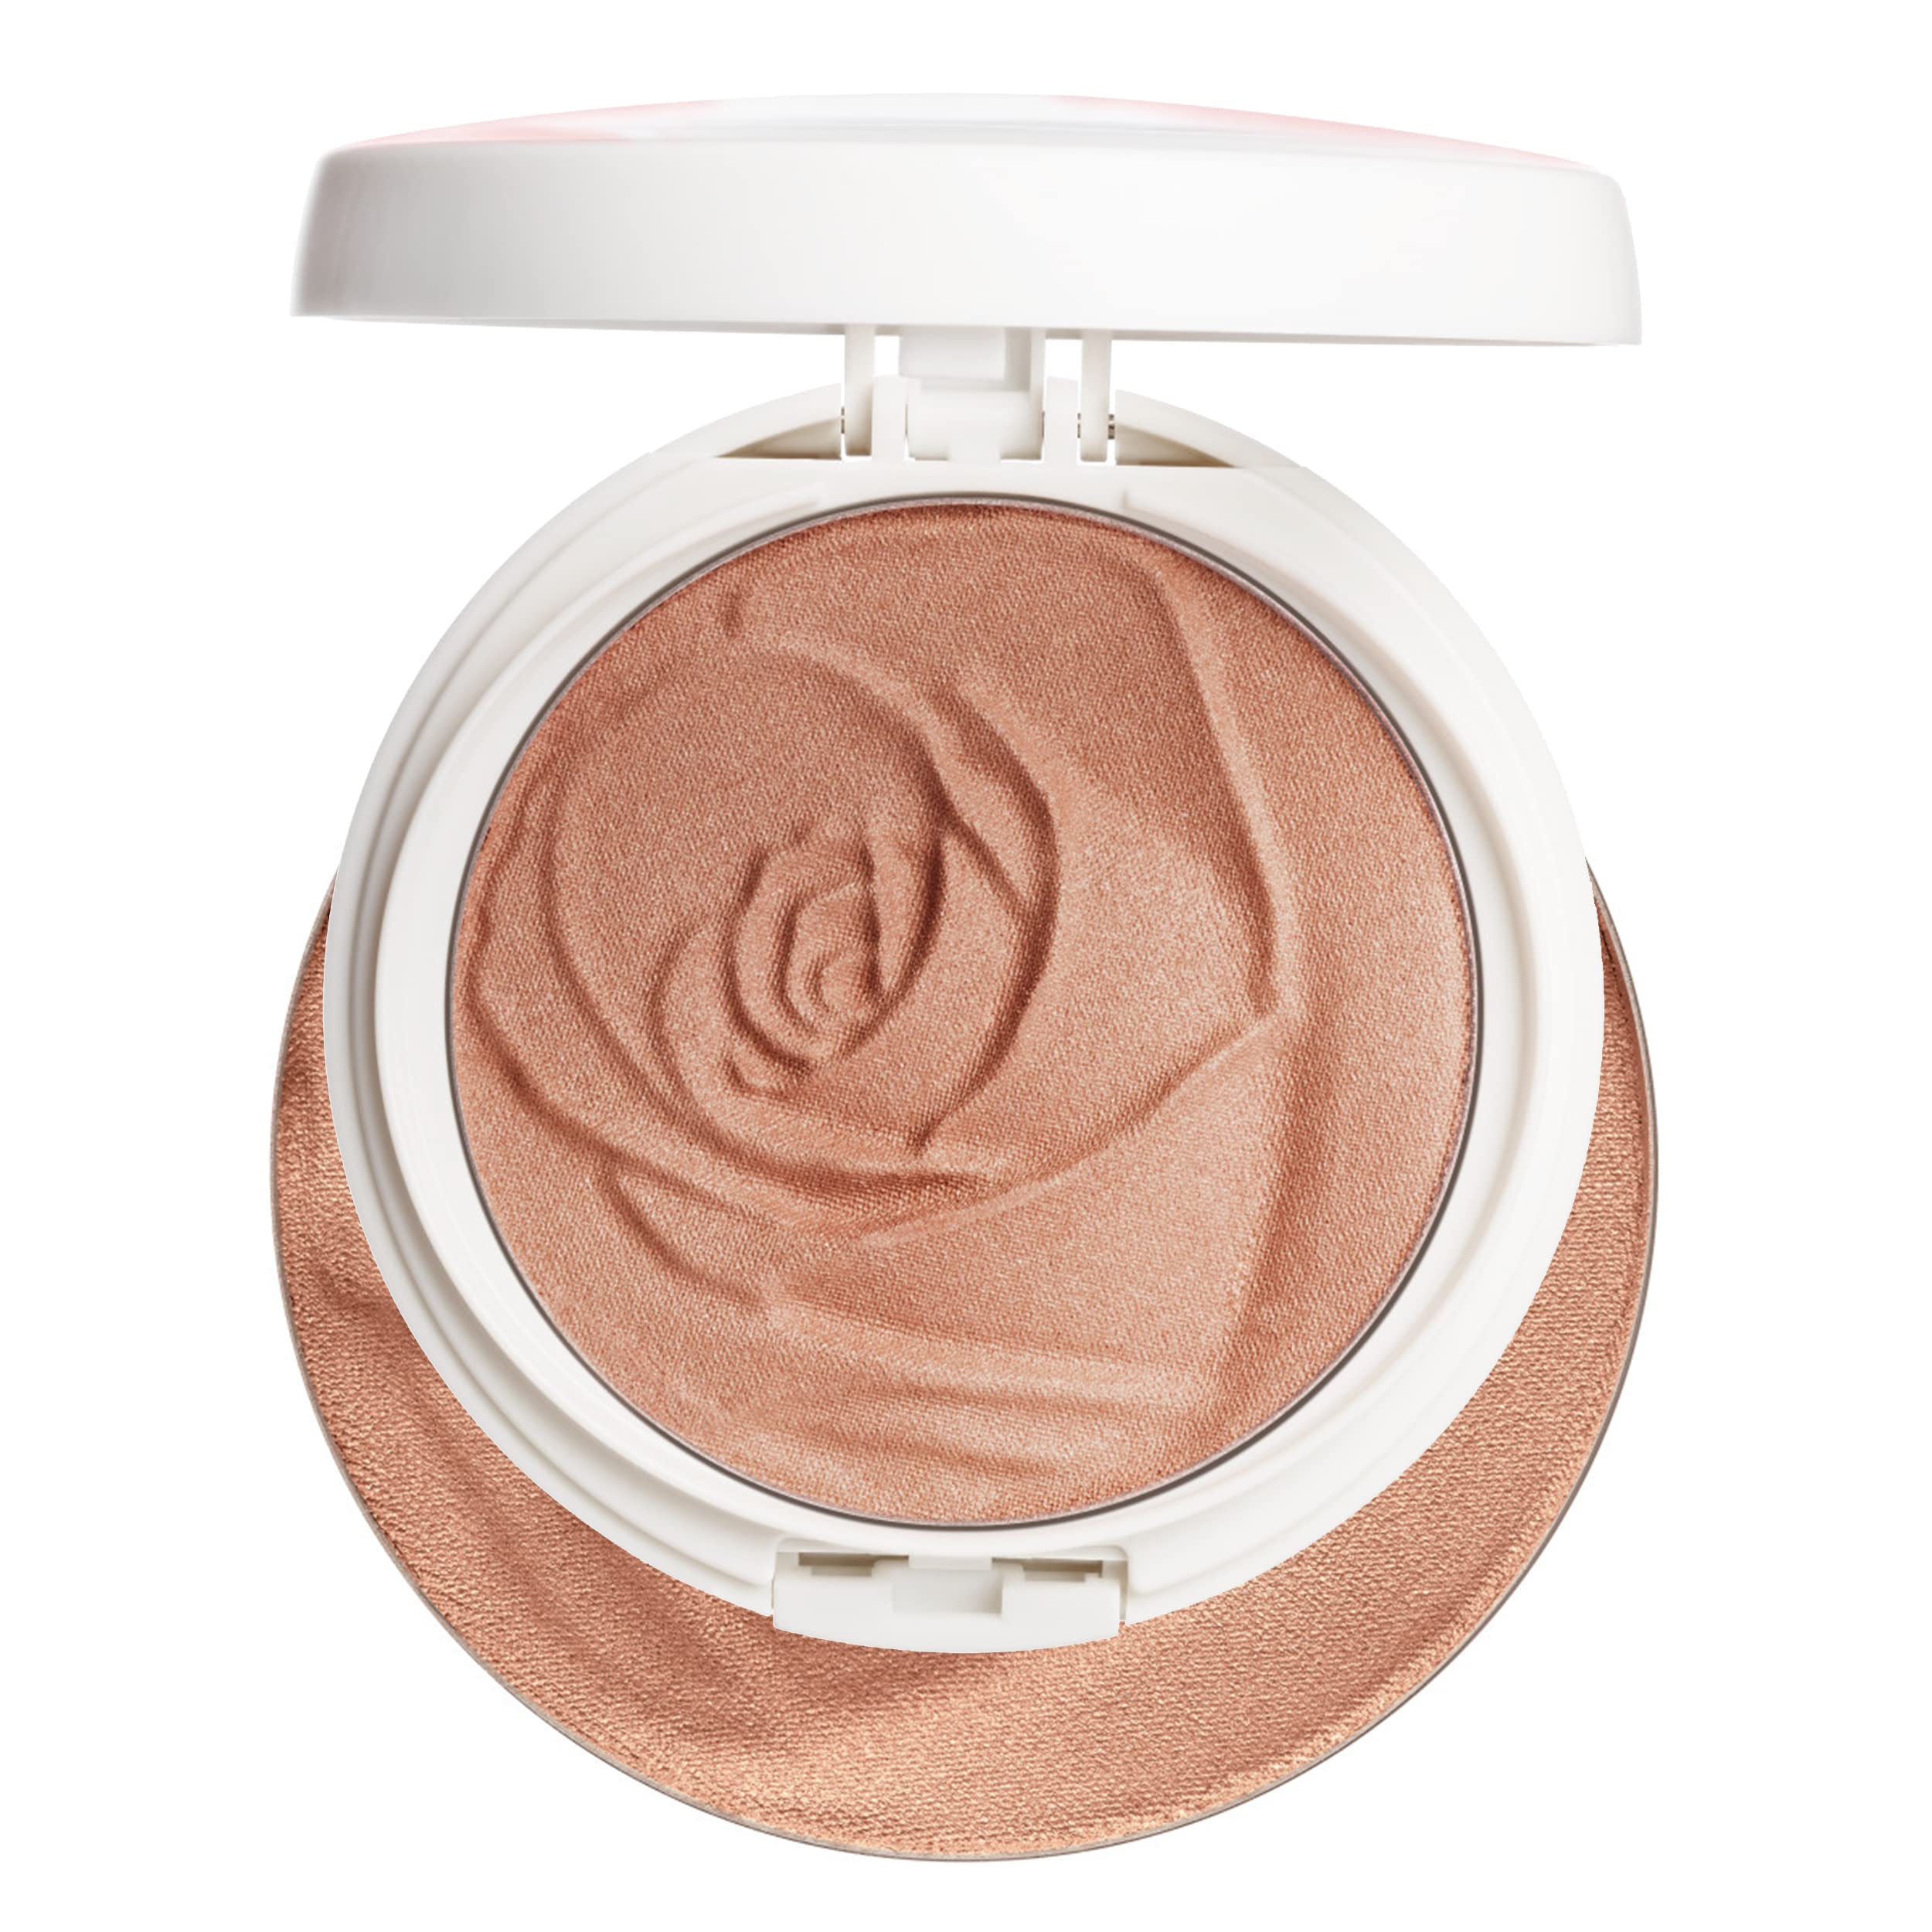 Physicians Formula Rosé All Day Set & Glow Highlighter Face Makeup Powder Sunlit Glow, Dermatologist Approved